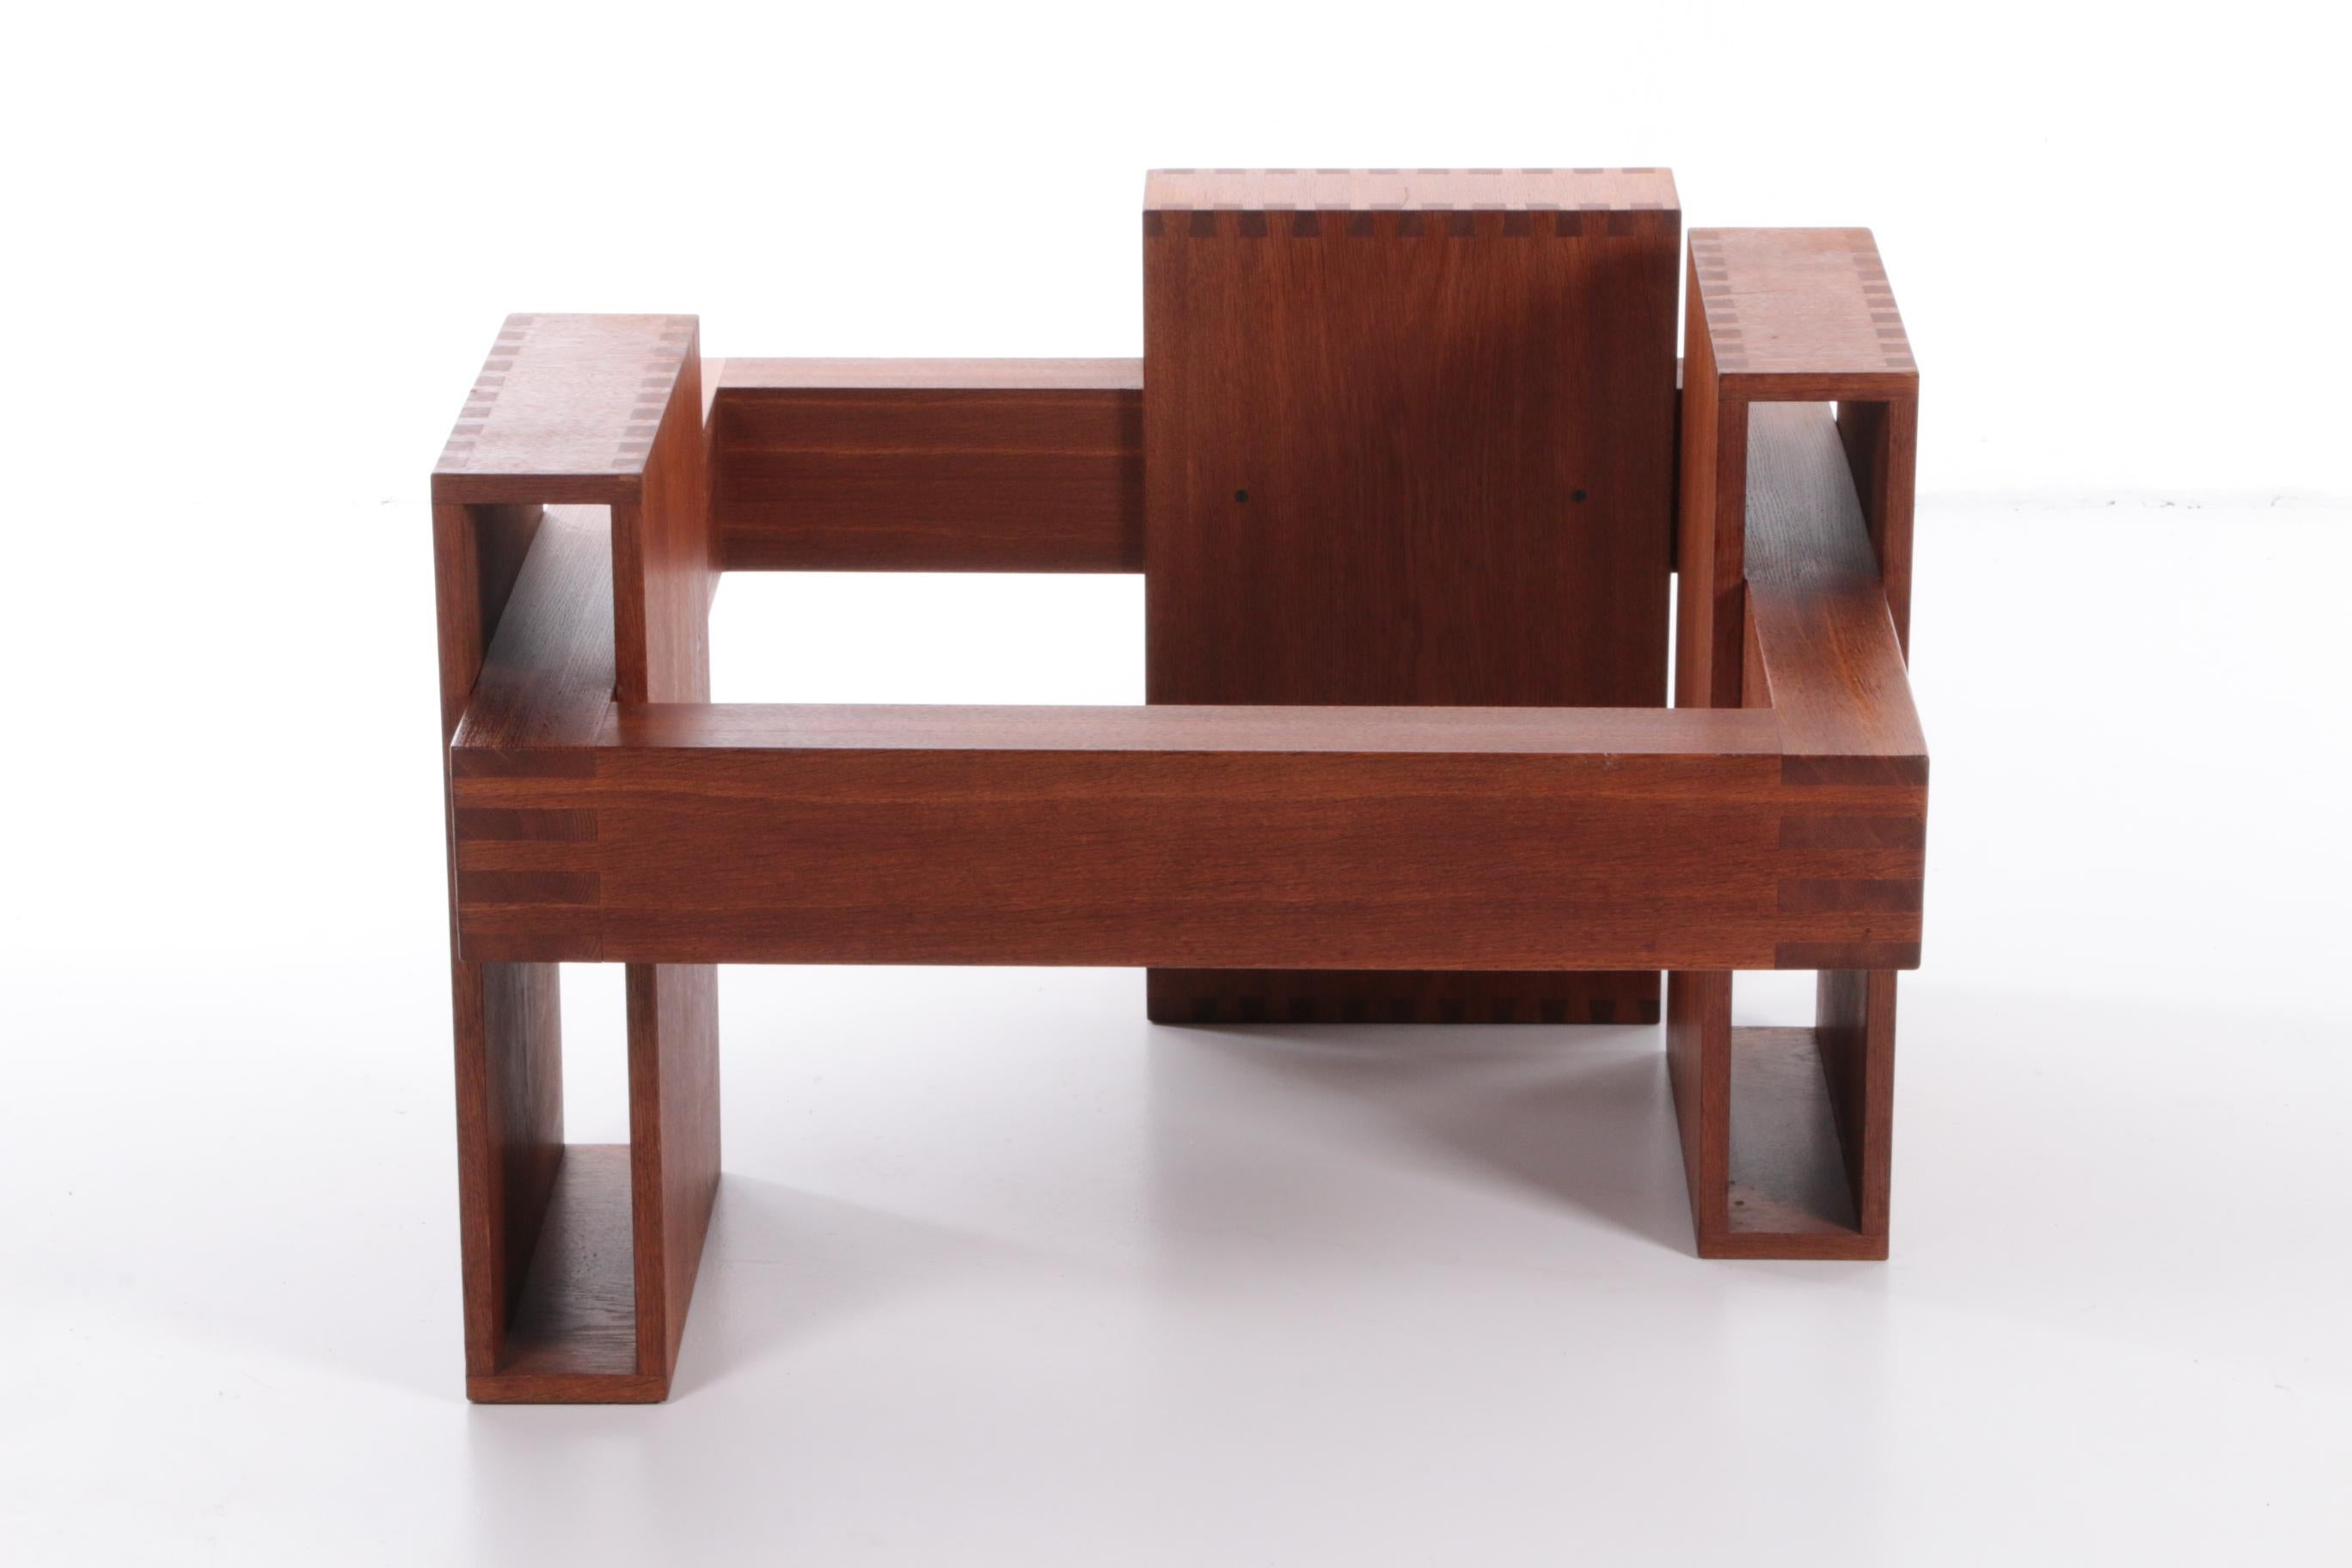 French Brutalist Design Coffee Table of Teak with Glass Top, 1970 For Sale 9